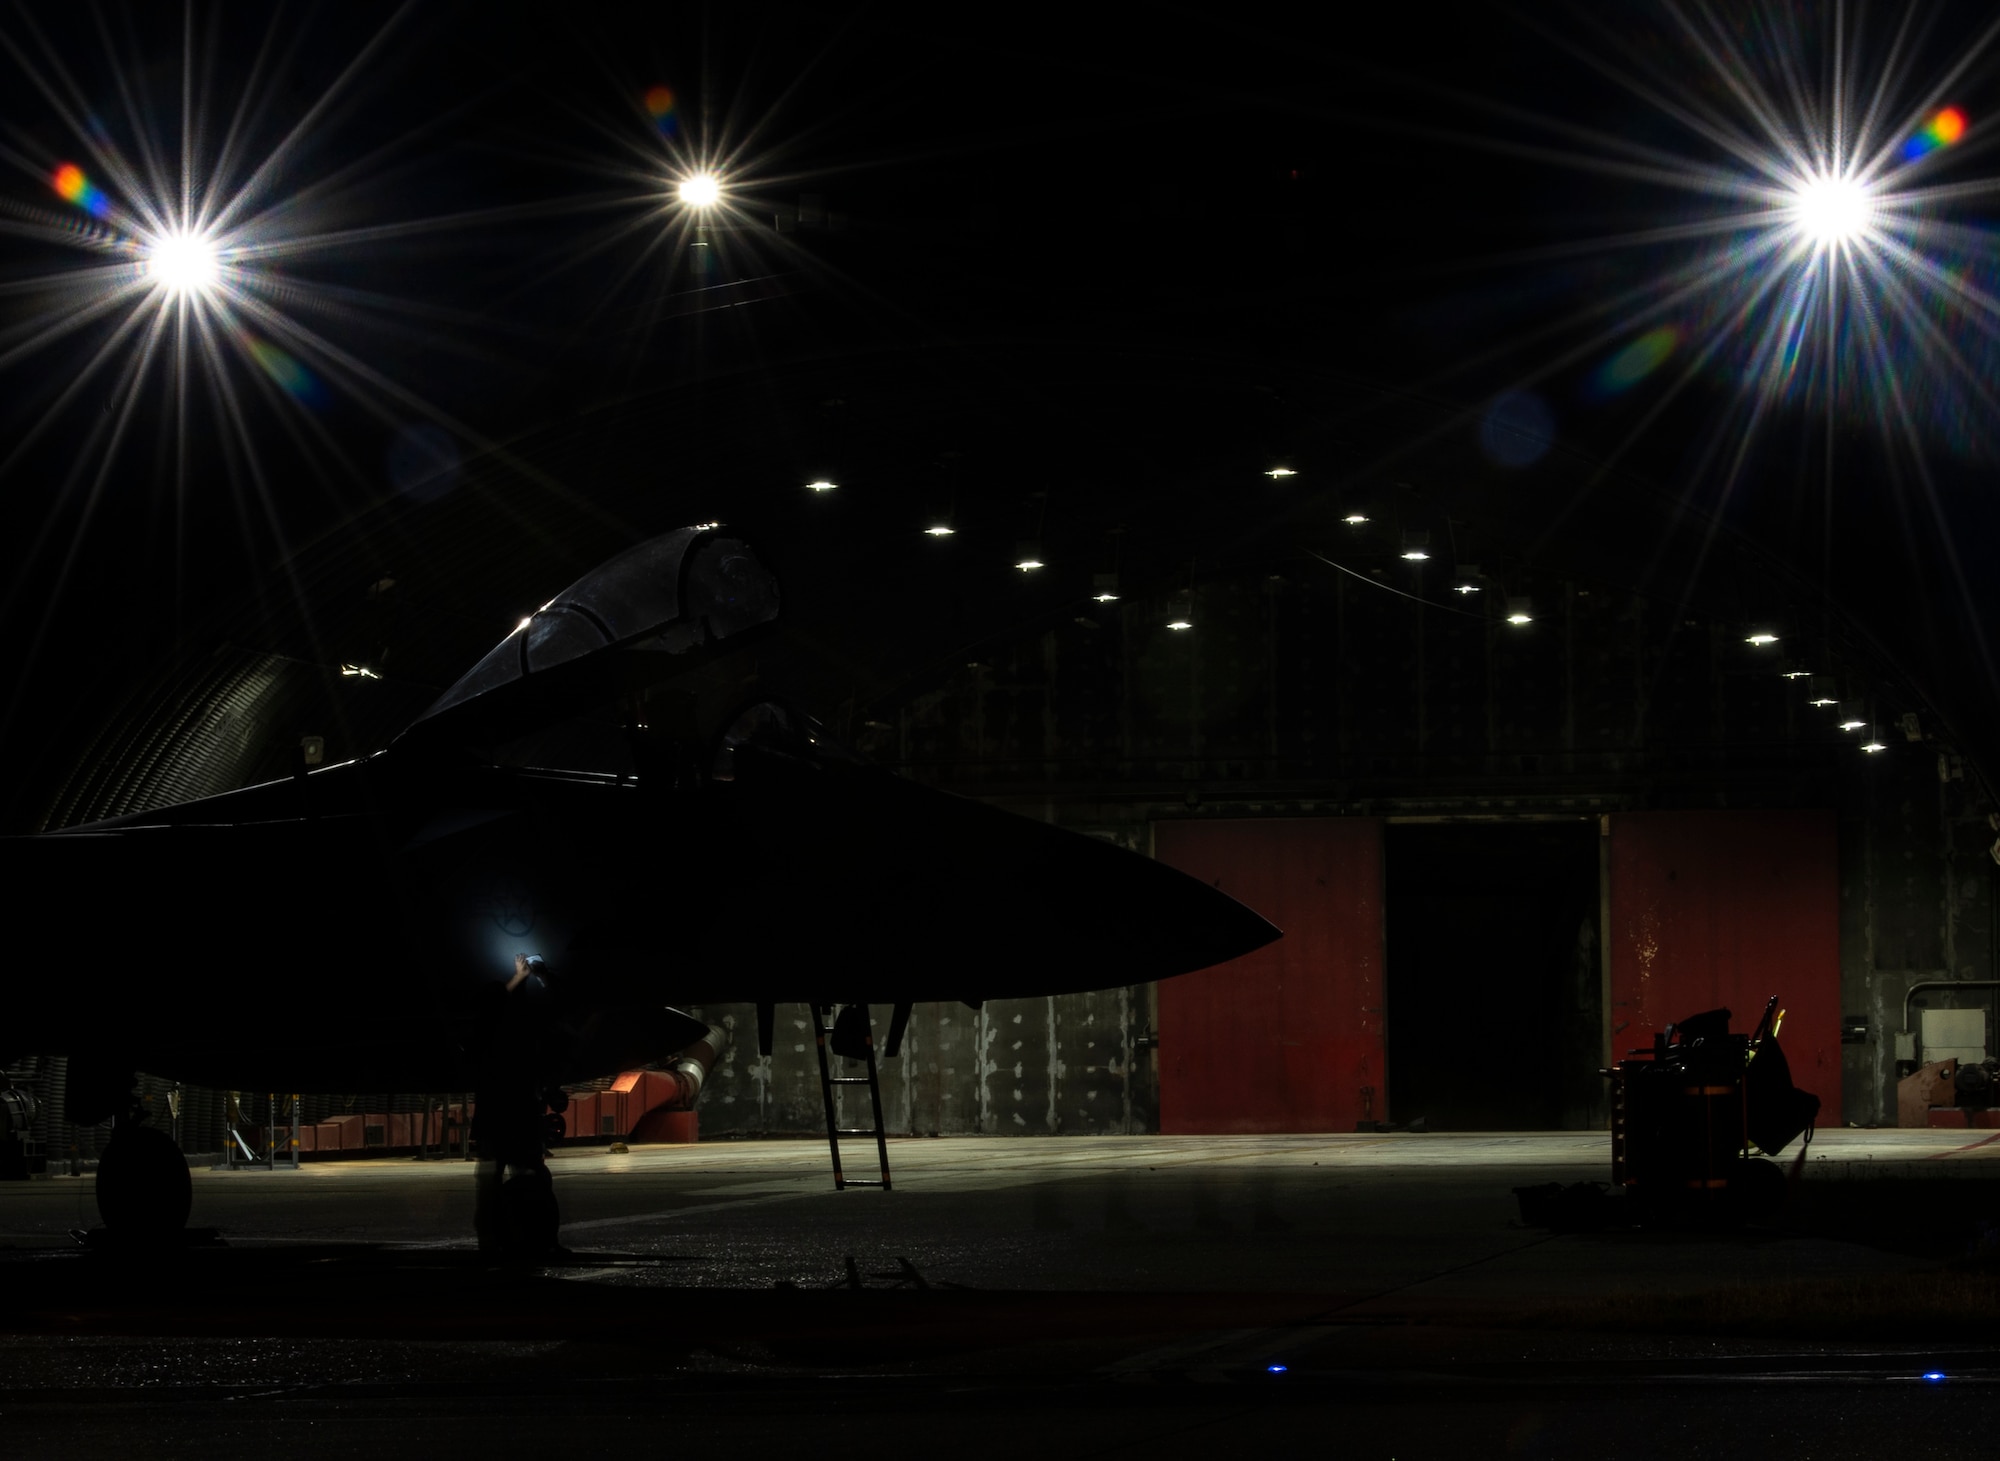 A U.S. Air Force crew chief, assigned to the 748th Aircraft Maintenance Squadron, performs routine post-flight maintenance on an F-15C Eagle at Royal Air Force Lakenheath, England, Sept. 8, 2020. Night Flying Exercises provide 48th Fighter Wing aircrew and support personnel the experience needed to maintain a ready force capable of ensuring the collective defence of the NATO alliance. (U.S. Air Force photo by Airman 1st Class Jessi Monte)